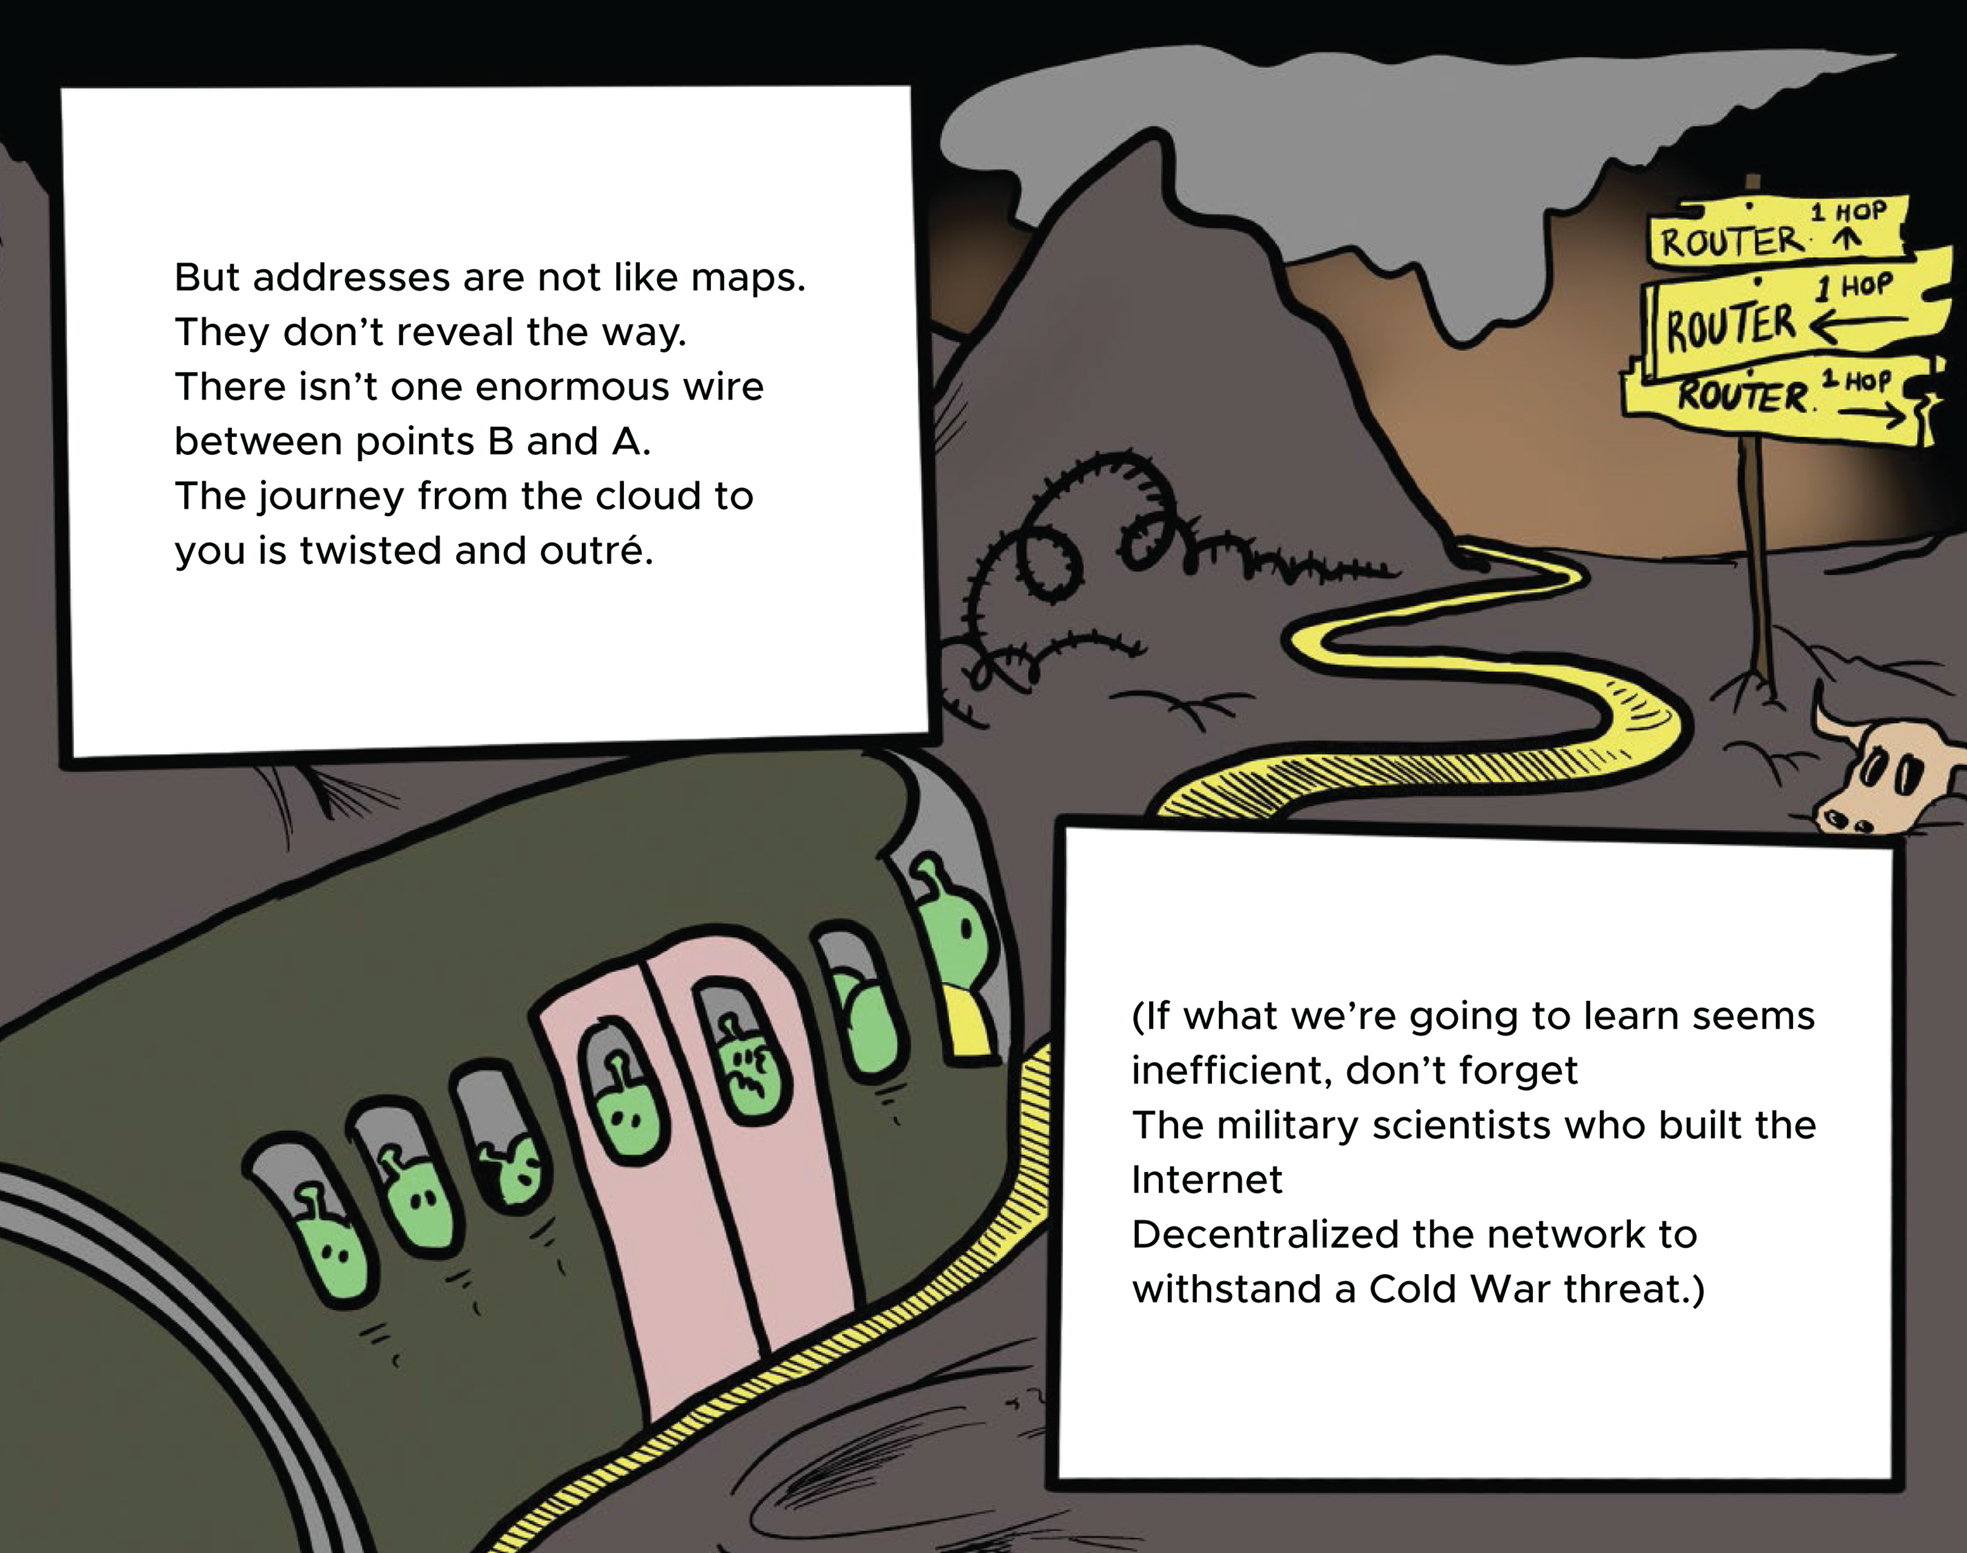 Cartoon illustration of the train that represents internet protocol travelling through the internet.